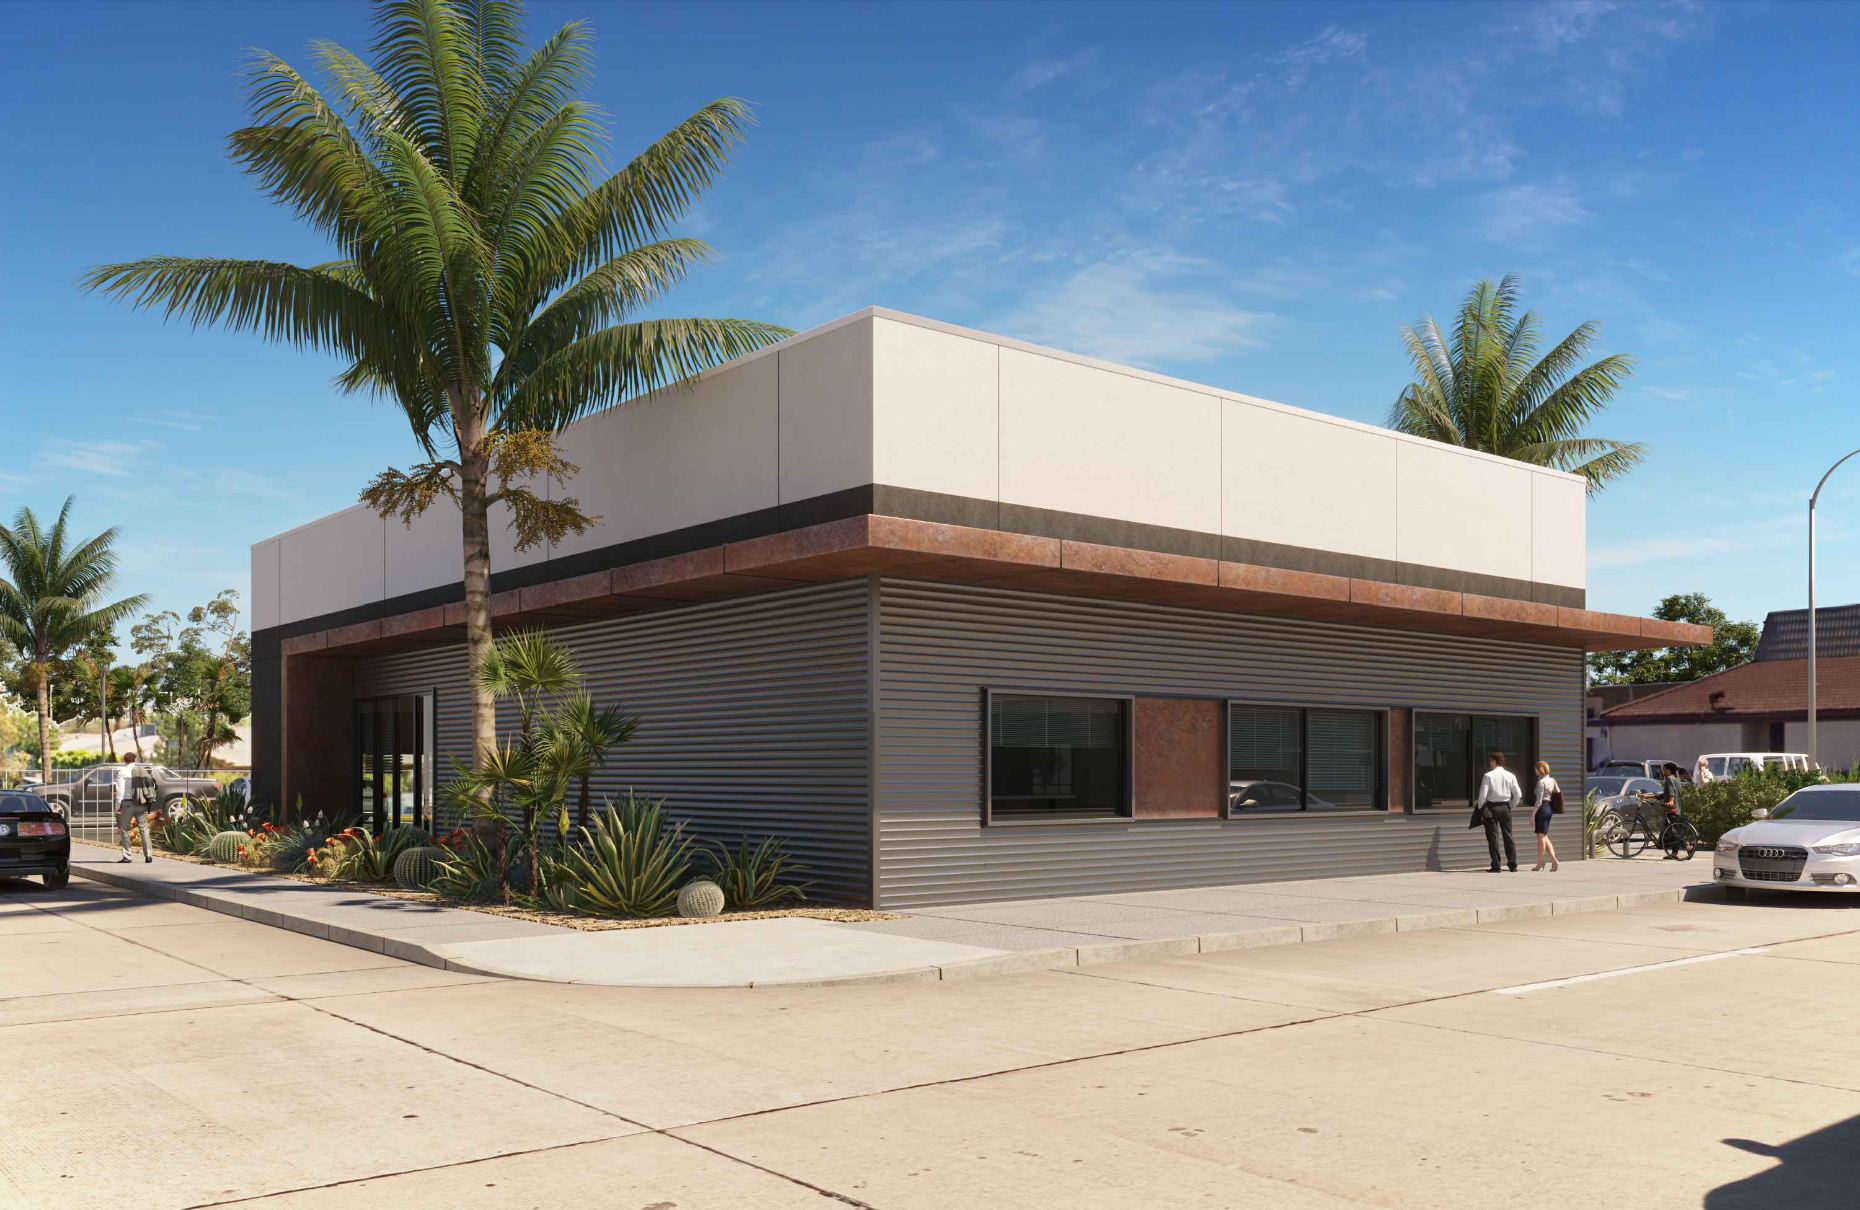  Modern Retail Storefront - Re-development of existing building.  (Architect’s rendering.) 